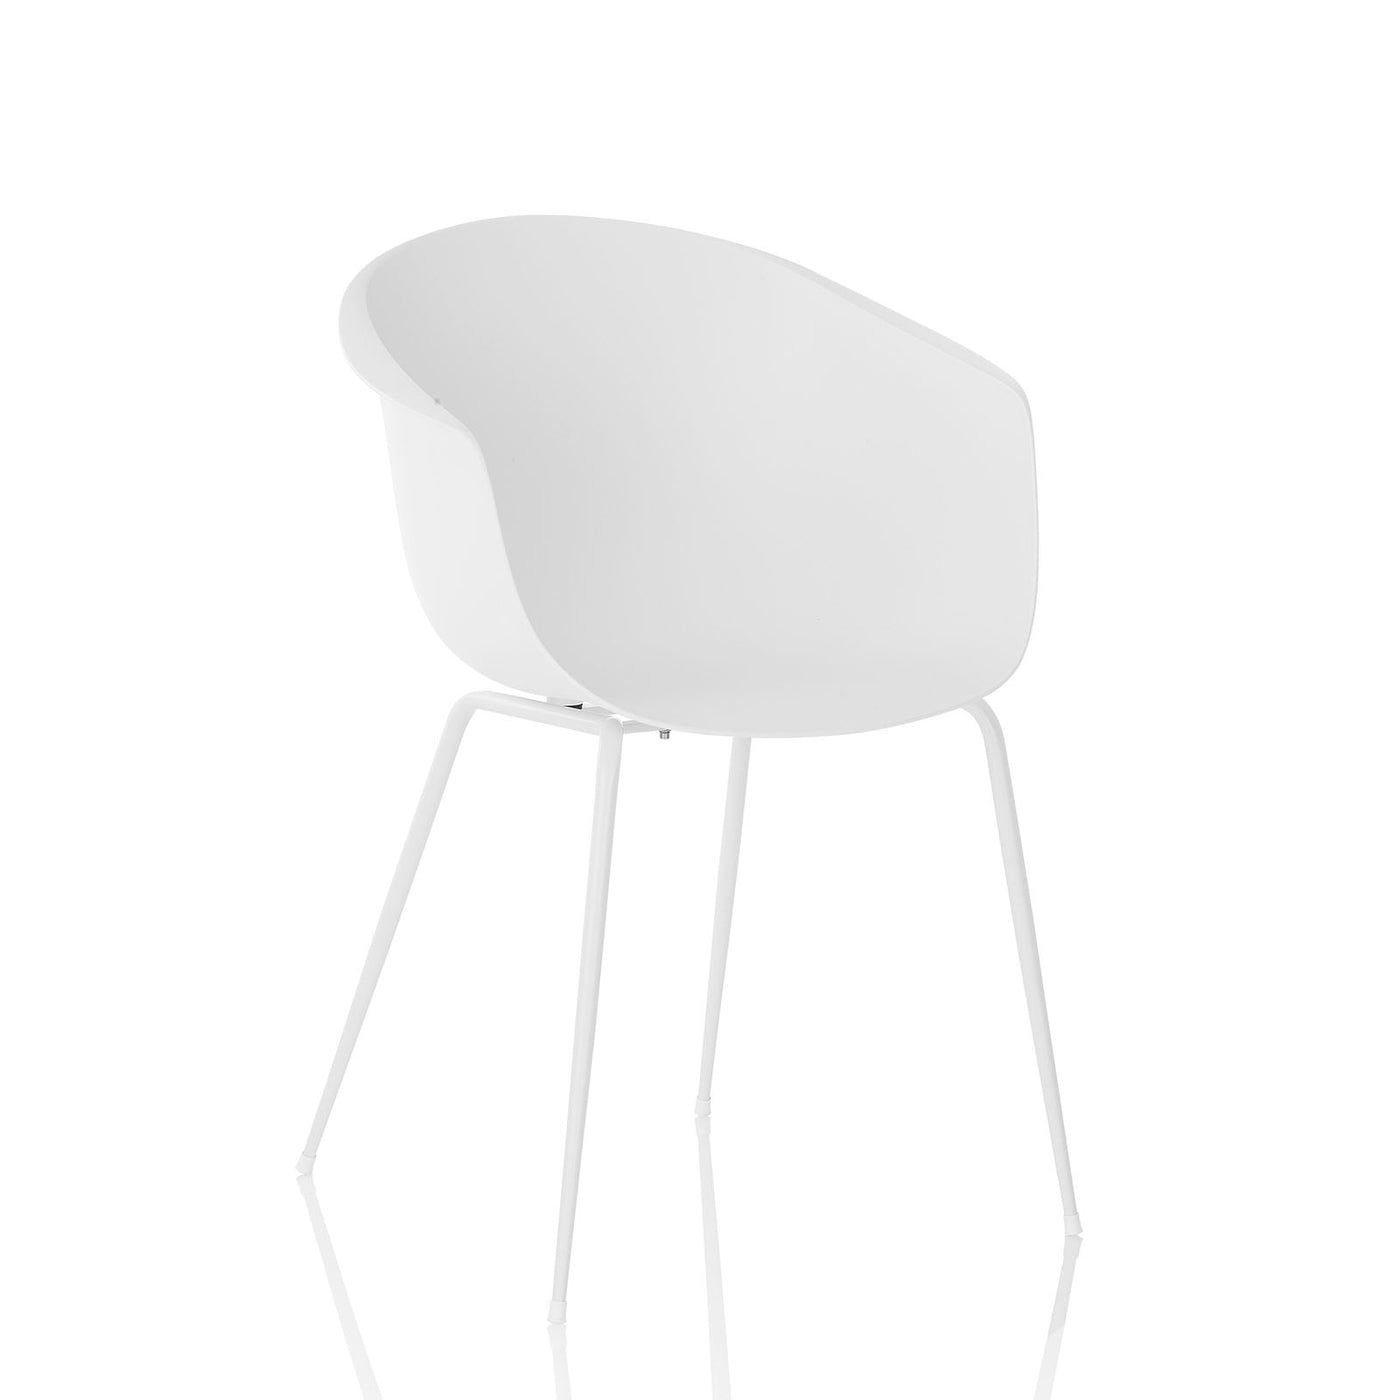 Set of 2 white POINT chairs